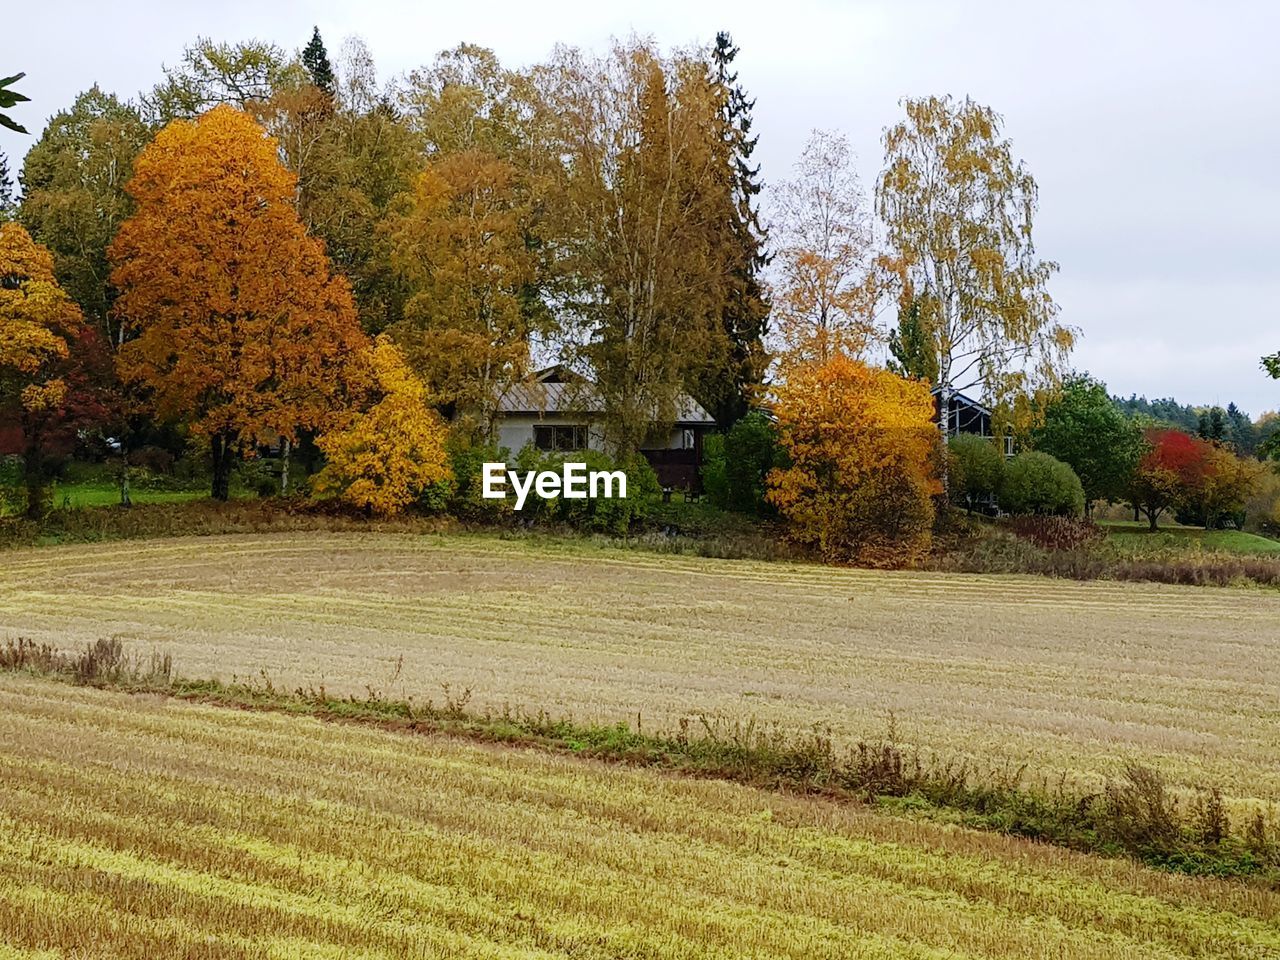 TREES GROWING ON FIELD DURING AUTUMN